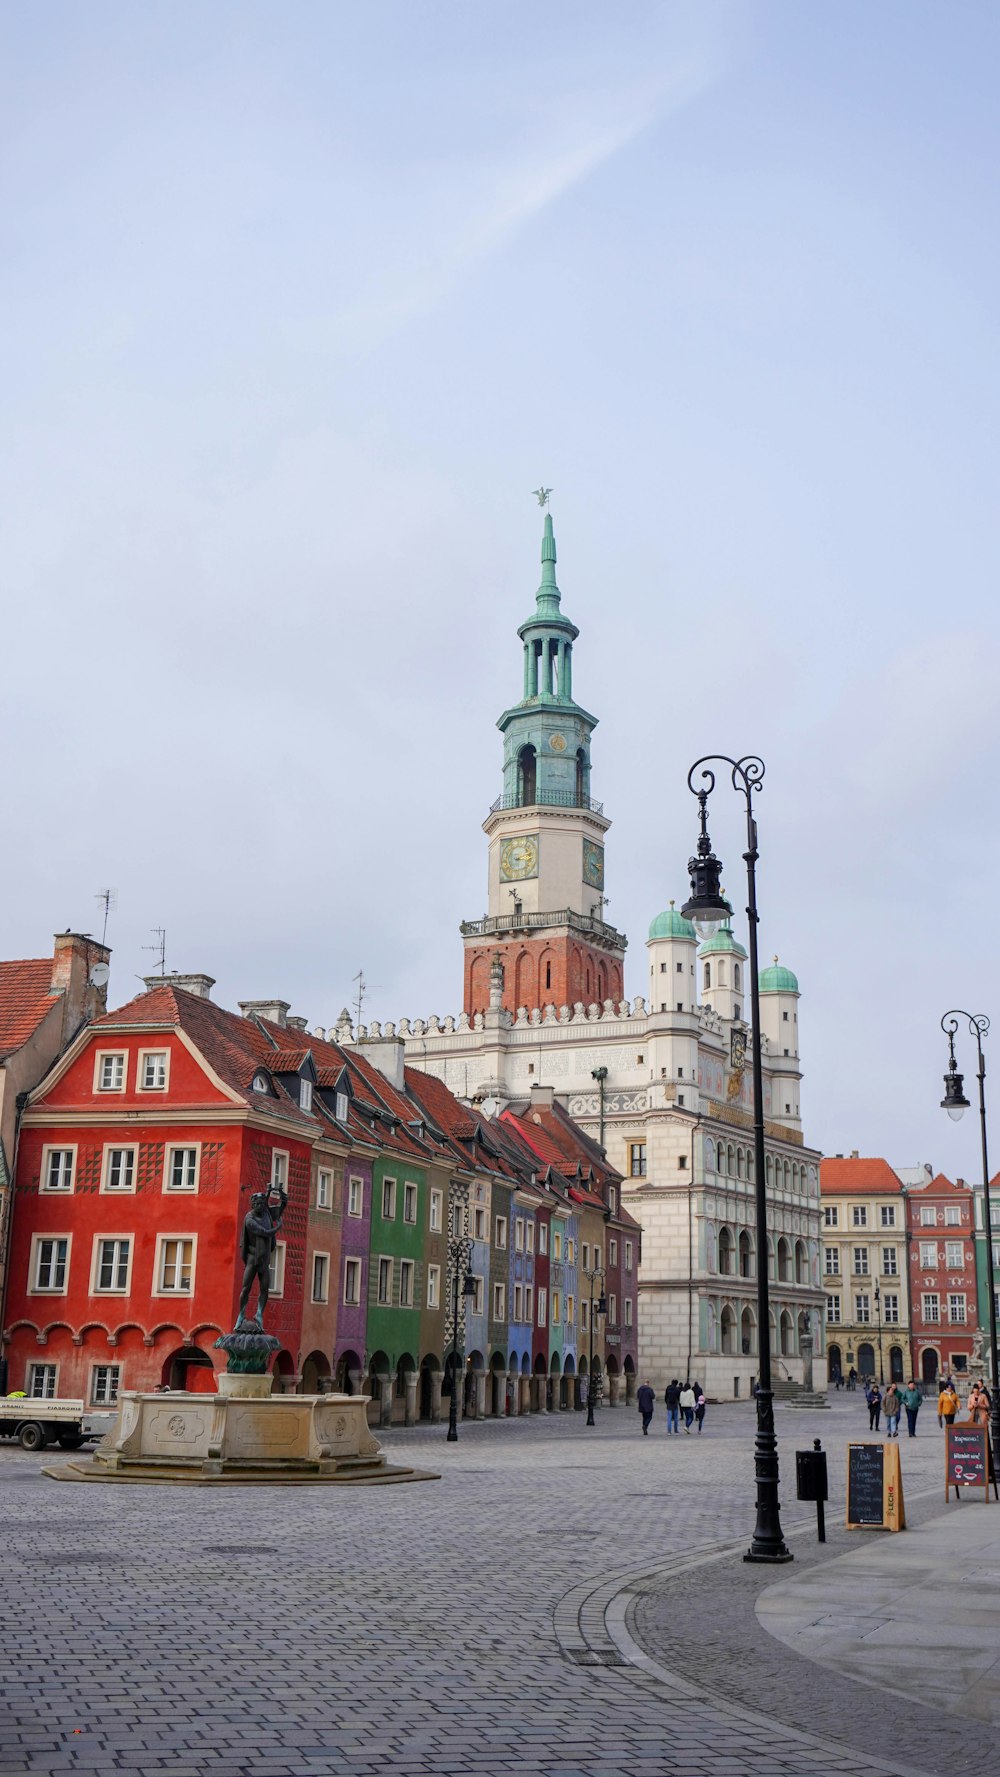 a city square with a clock tower in the background